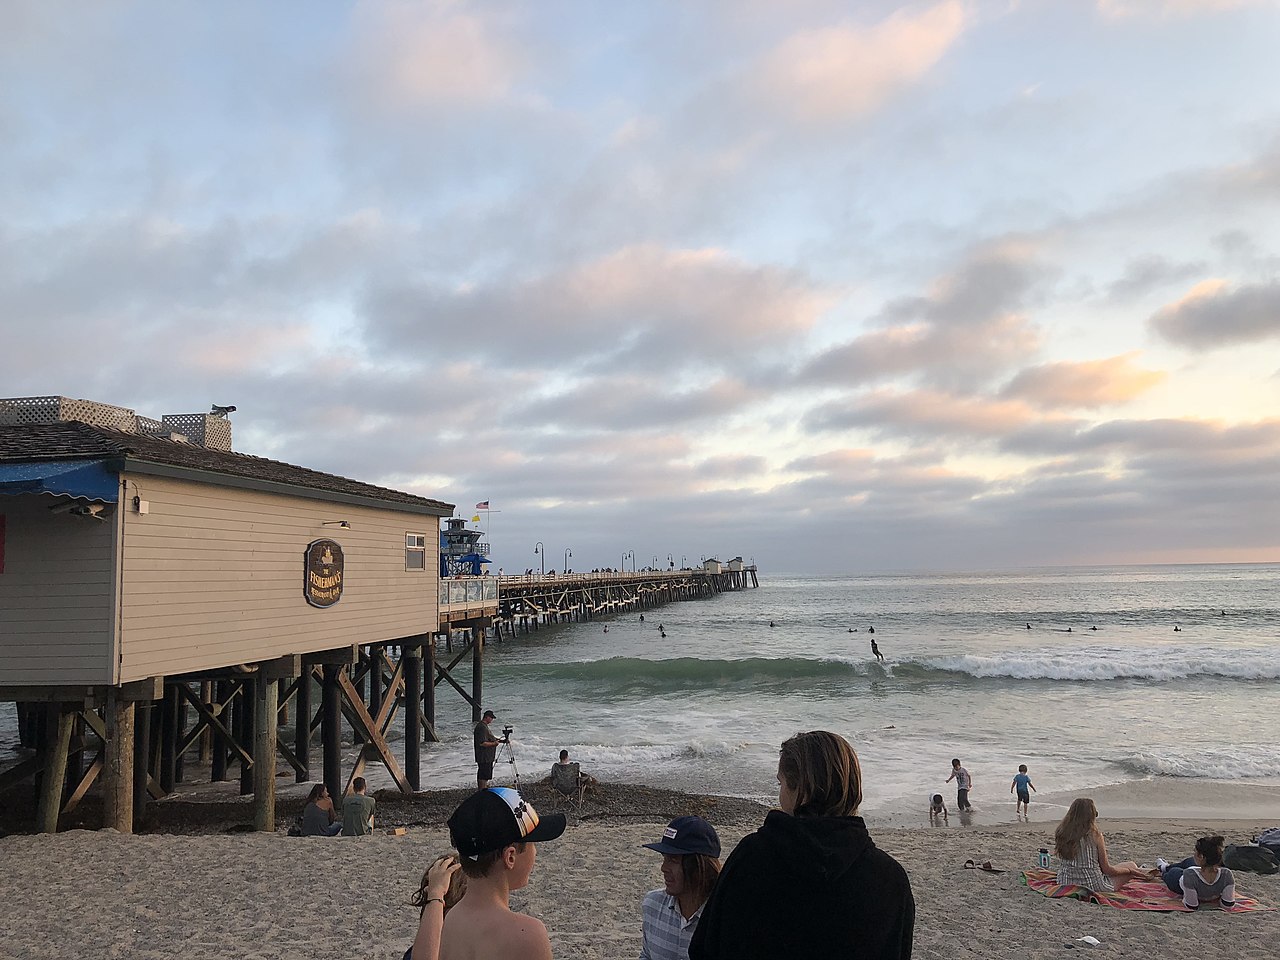 San Clemente Pier and Fishermans Restaurant taken from the beach